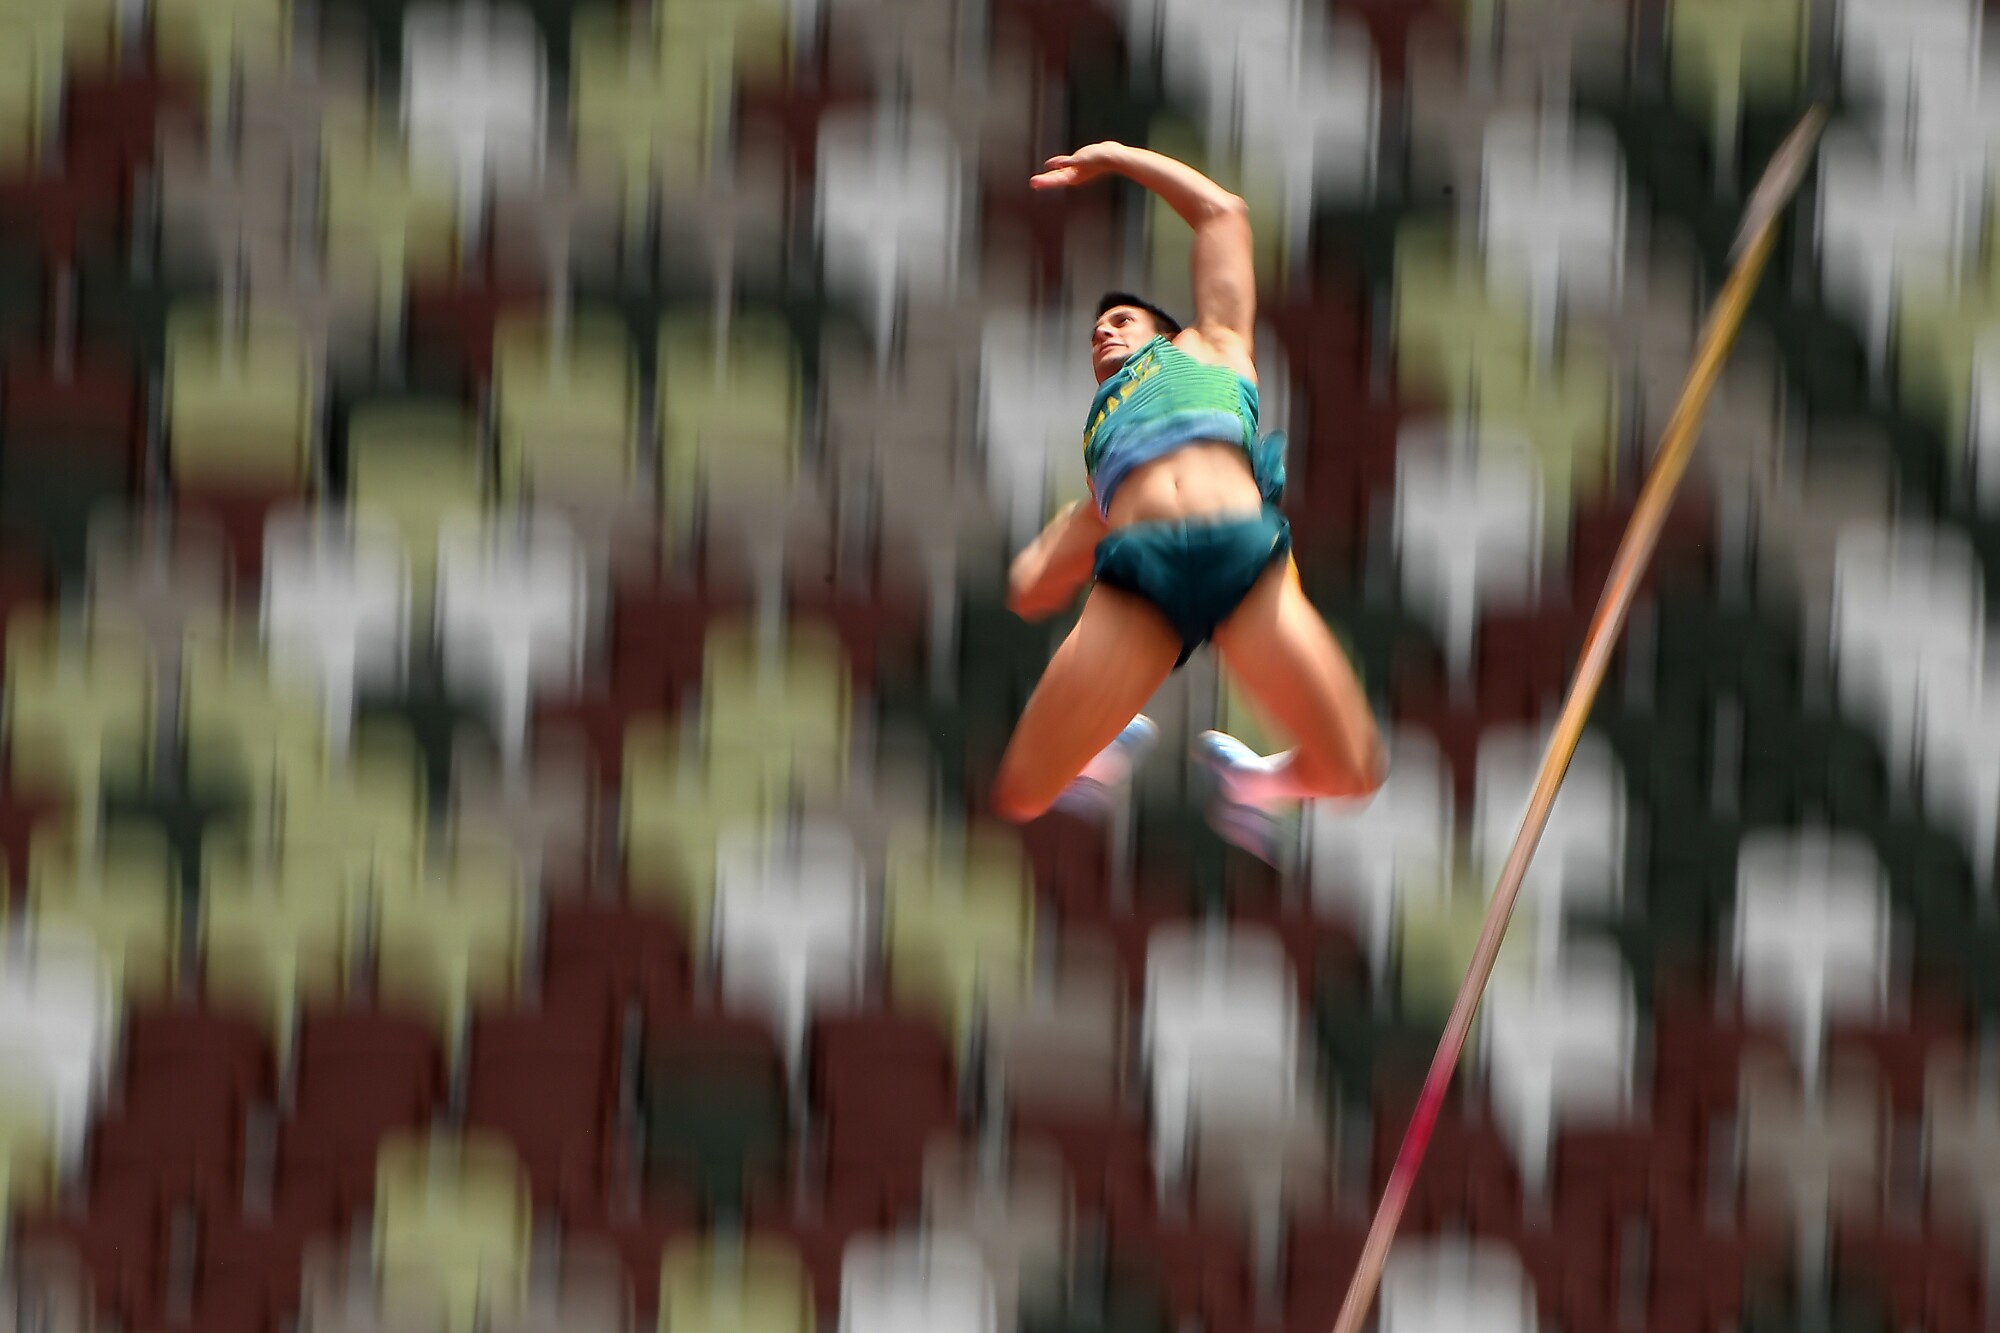 A man falls after clearing the pole vaulting bar.